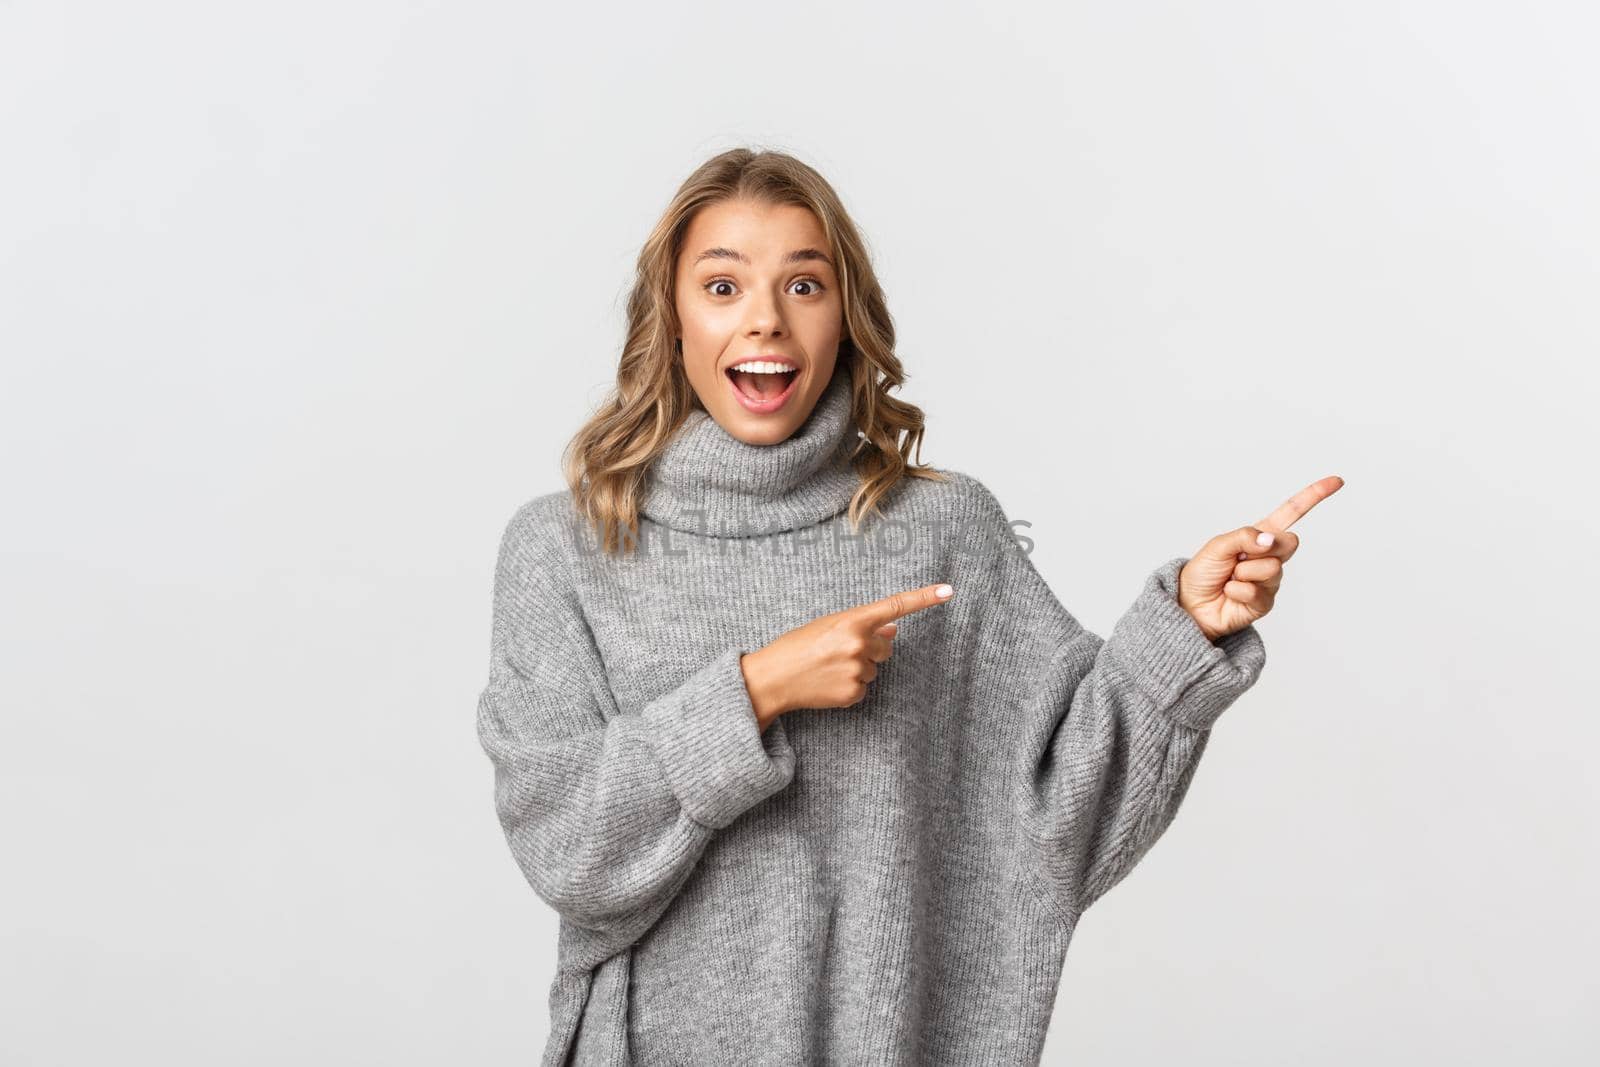 Image of amazed blond girl showing your logo, pointing fingers right and smiling excited, standing over white background.